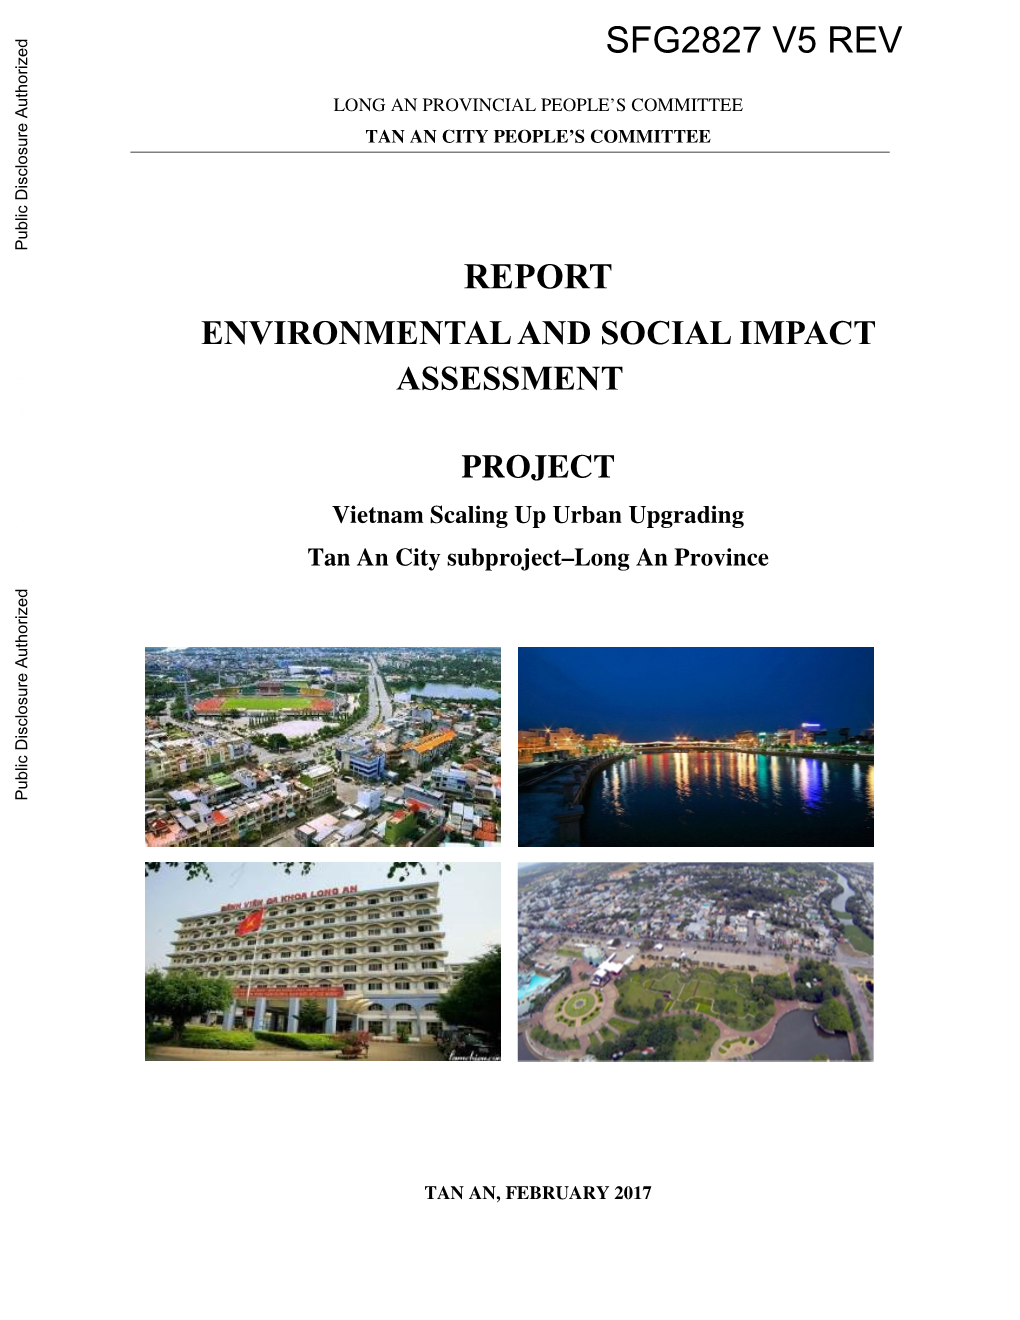 Scaling-Up Urban Upgrading Project : Environmental Assessment